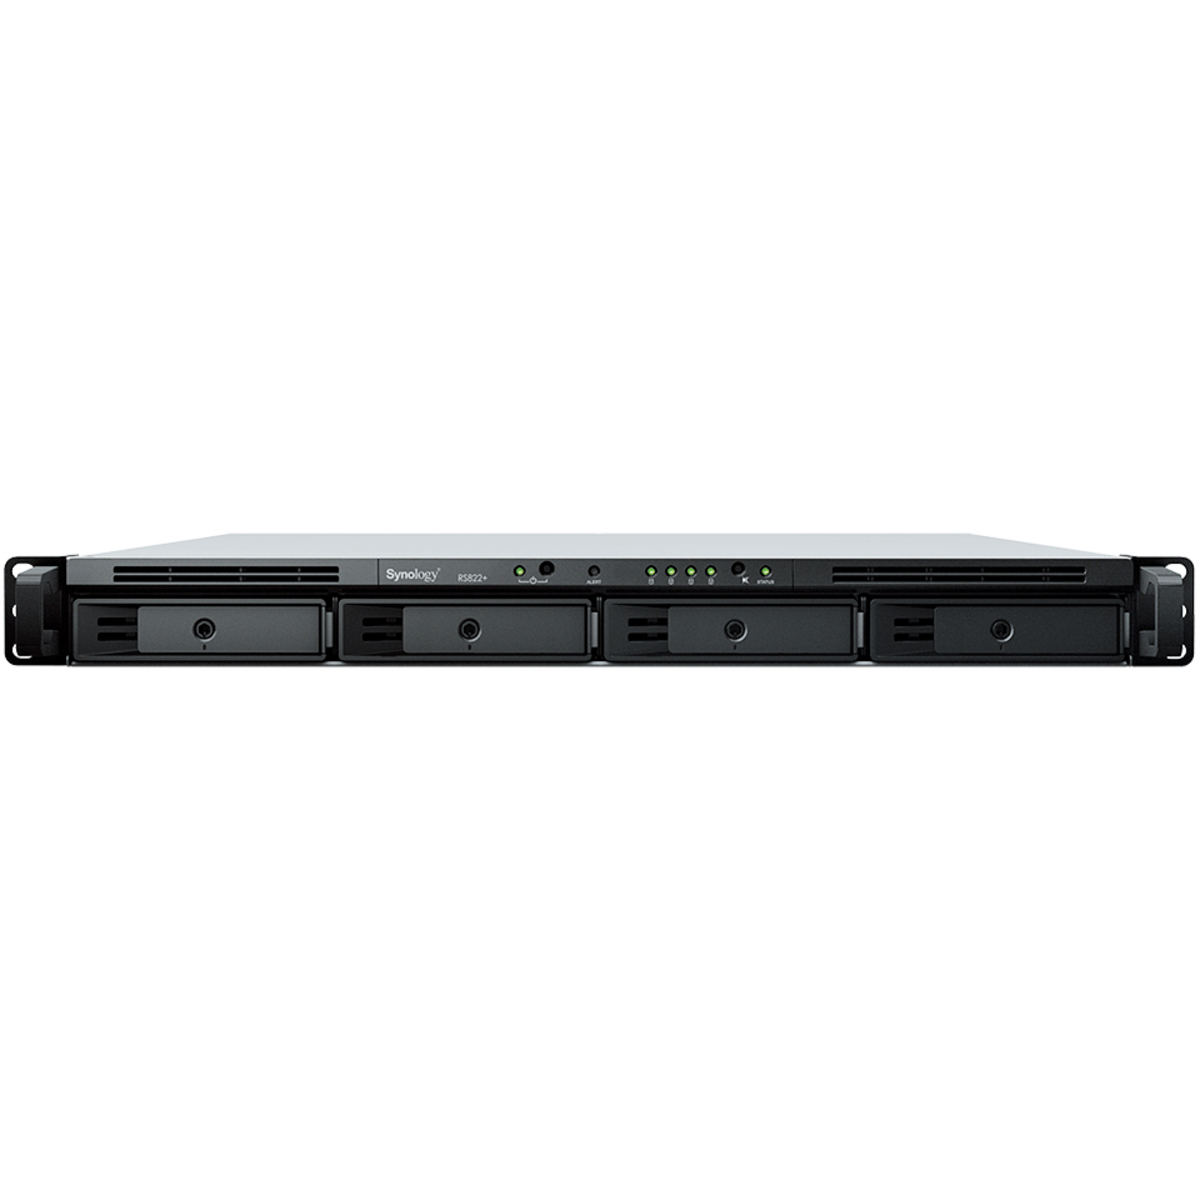 buy $2847 Synology RackStation RS822+ 80tb RackMount NAS - Network Attached Storage Device 4x20000gb Western Digital Red Pro WD201KFGX 3.5 7200rpm SATA 6Gb/s HDD NAS Class Drives Installed - Burn-In Tested - nas headquarters buy network attached storage server device das new raid-5 free shipping usa RackStation RS822+